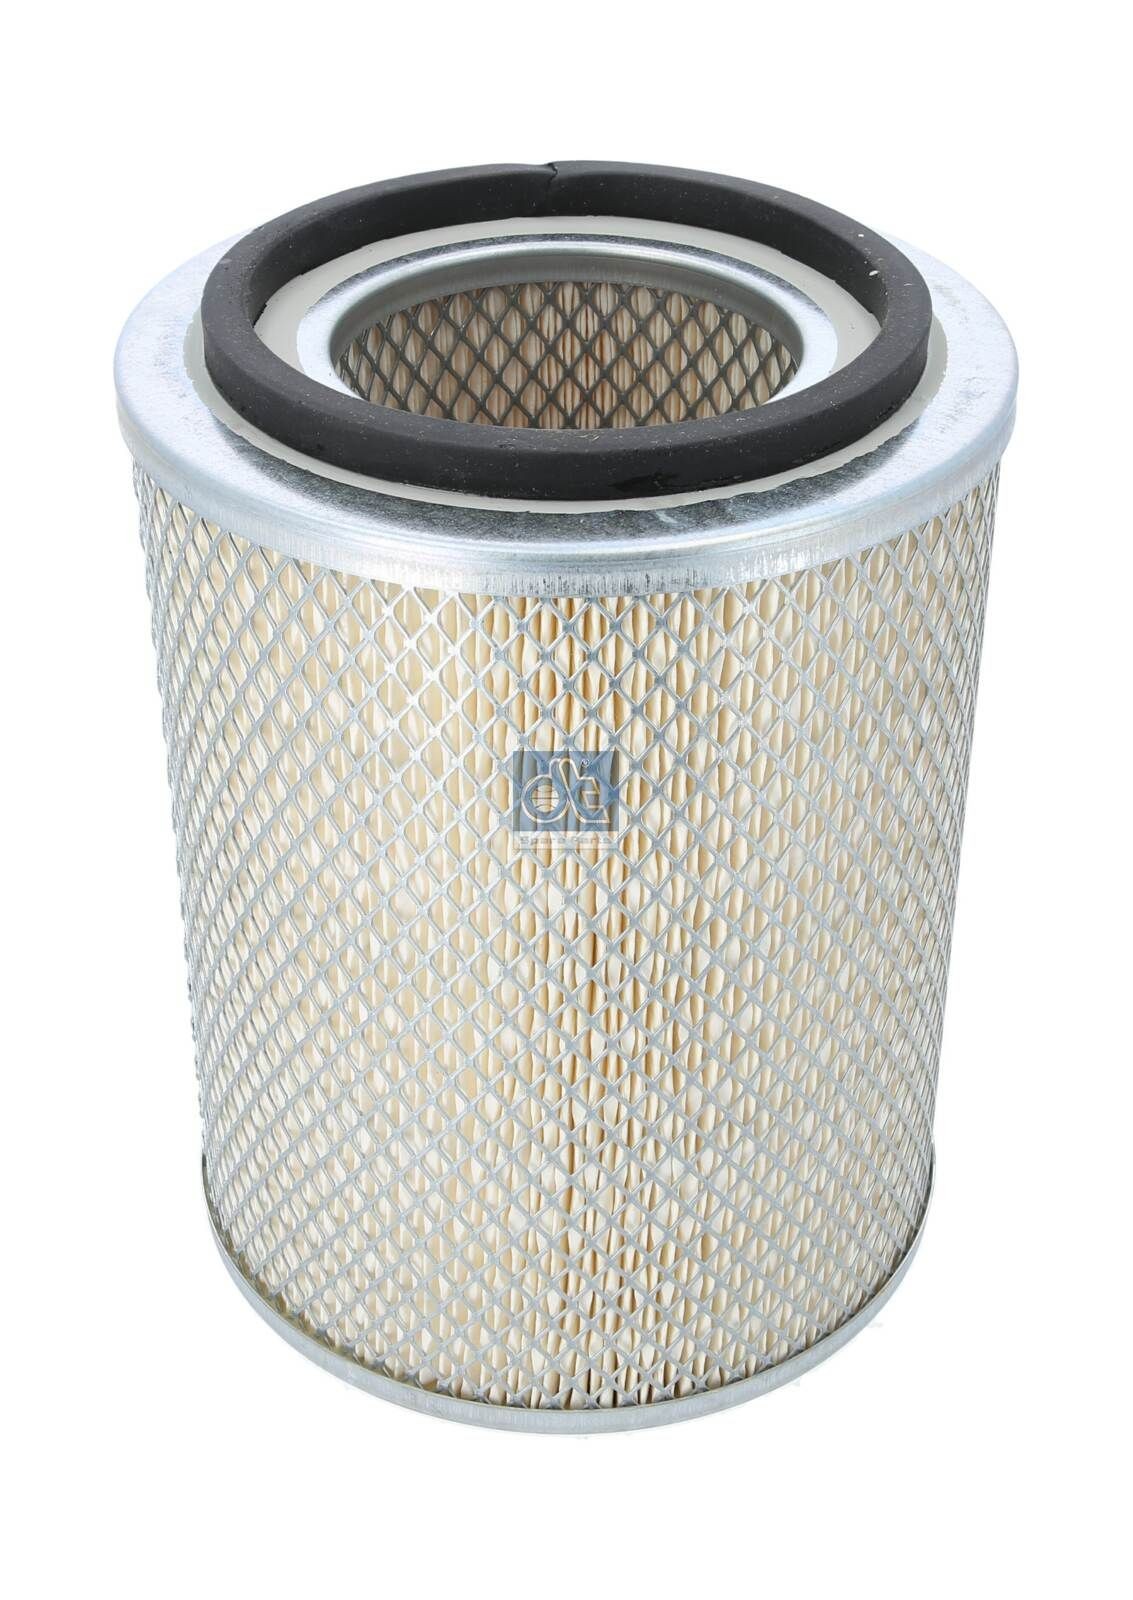 E133L DT Spare Parts 243mm, 198mm, Filter Insert Height: 243mm Engine air filter 4.64364 buy